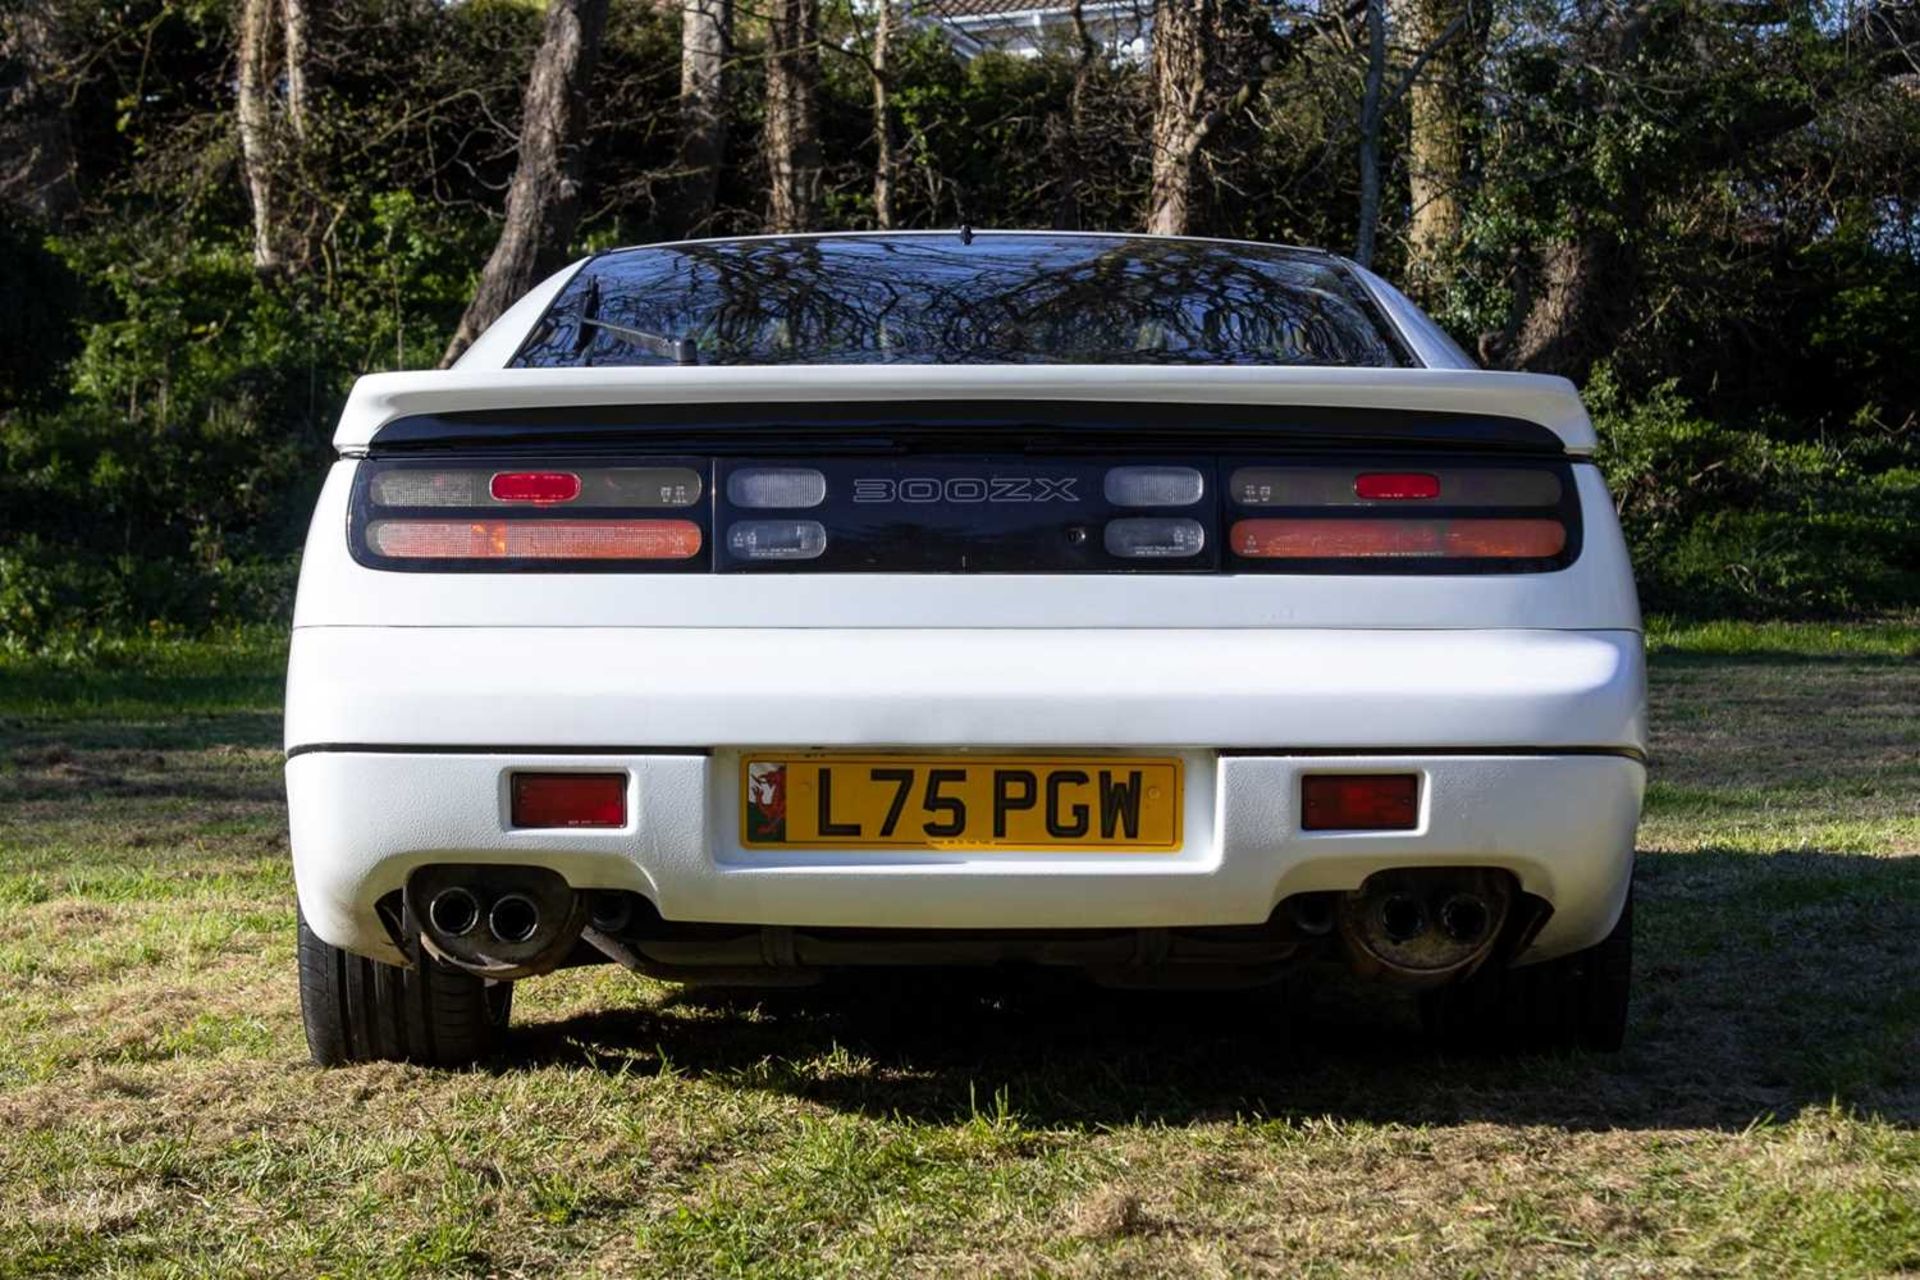 1990 Nissan 300ZX Turbo 2+2 Targa One of the last examples registered in the UK - Image 10 of 89